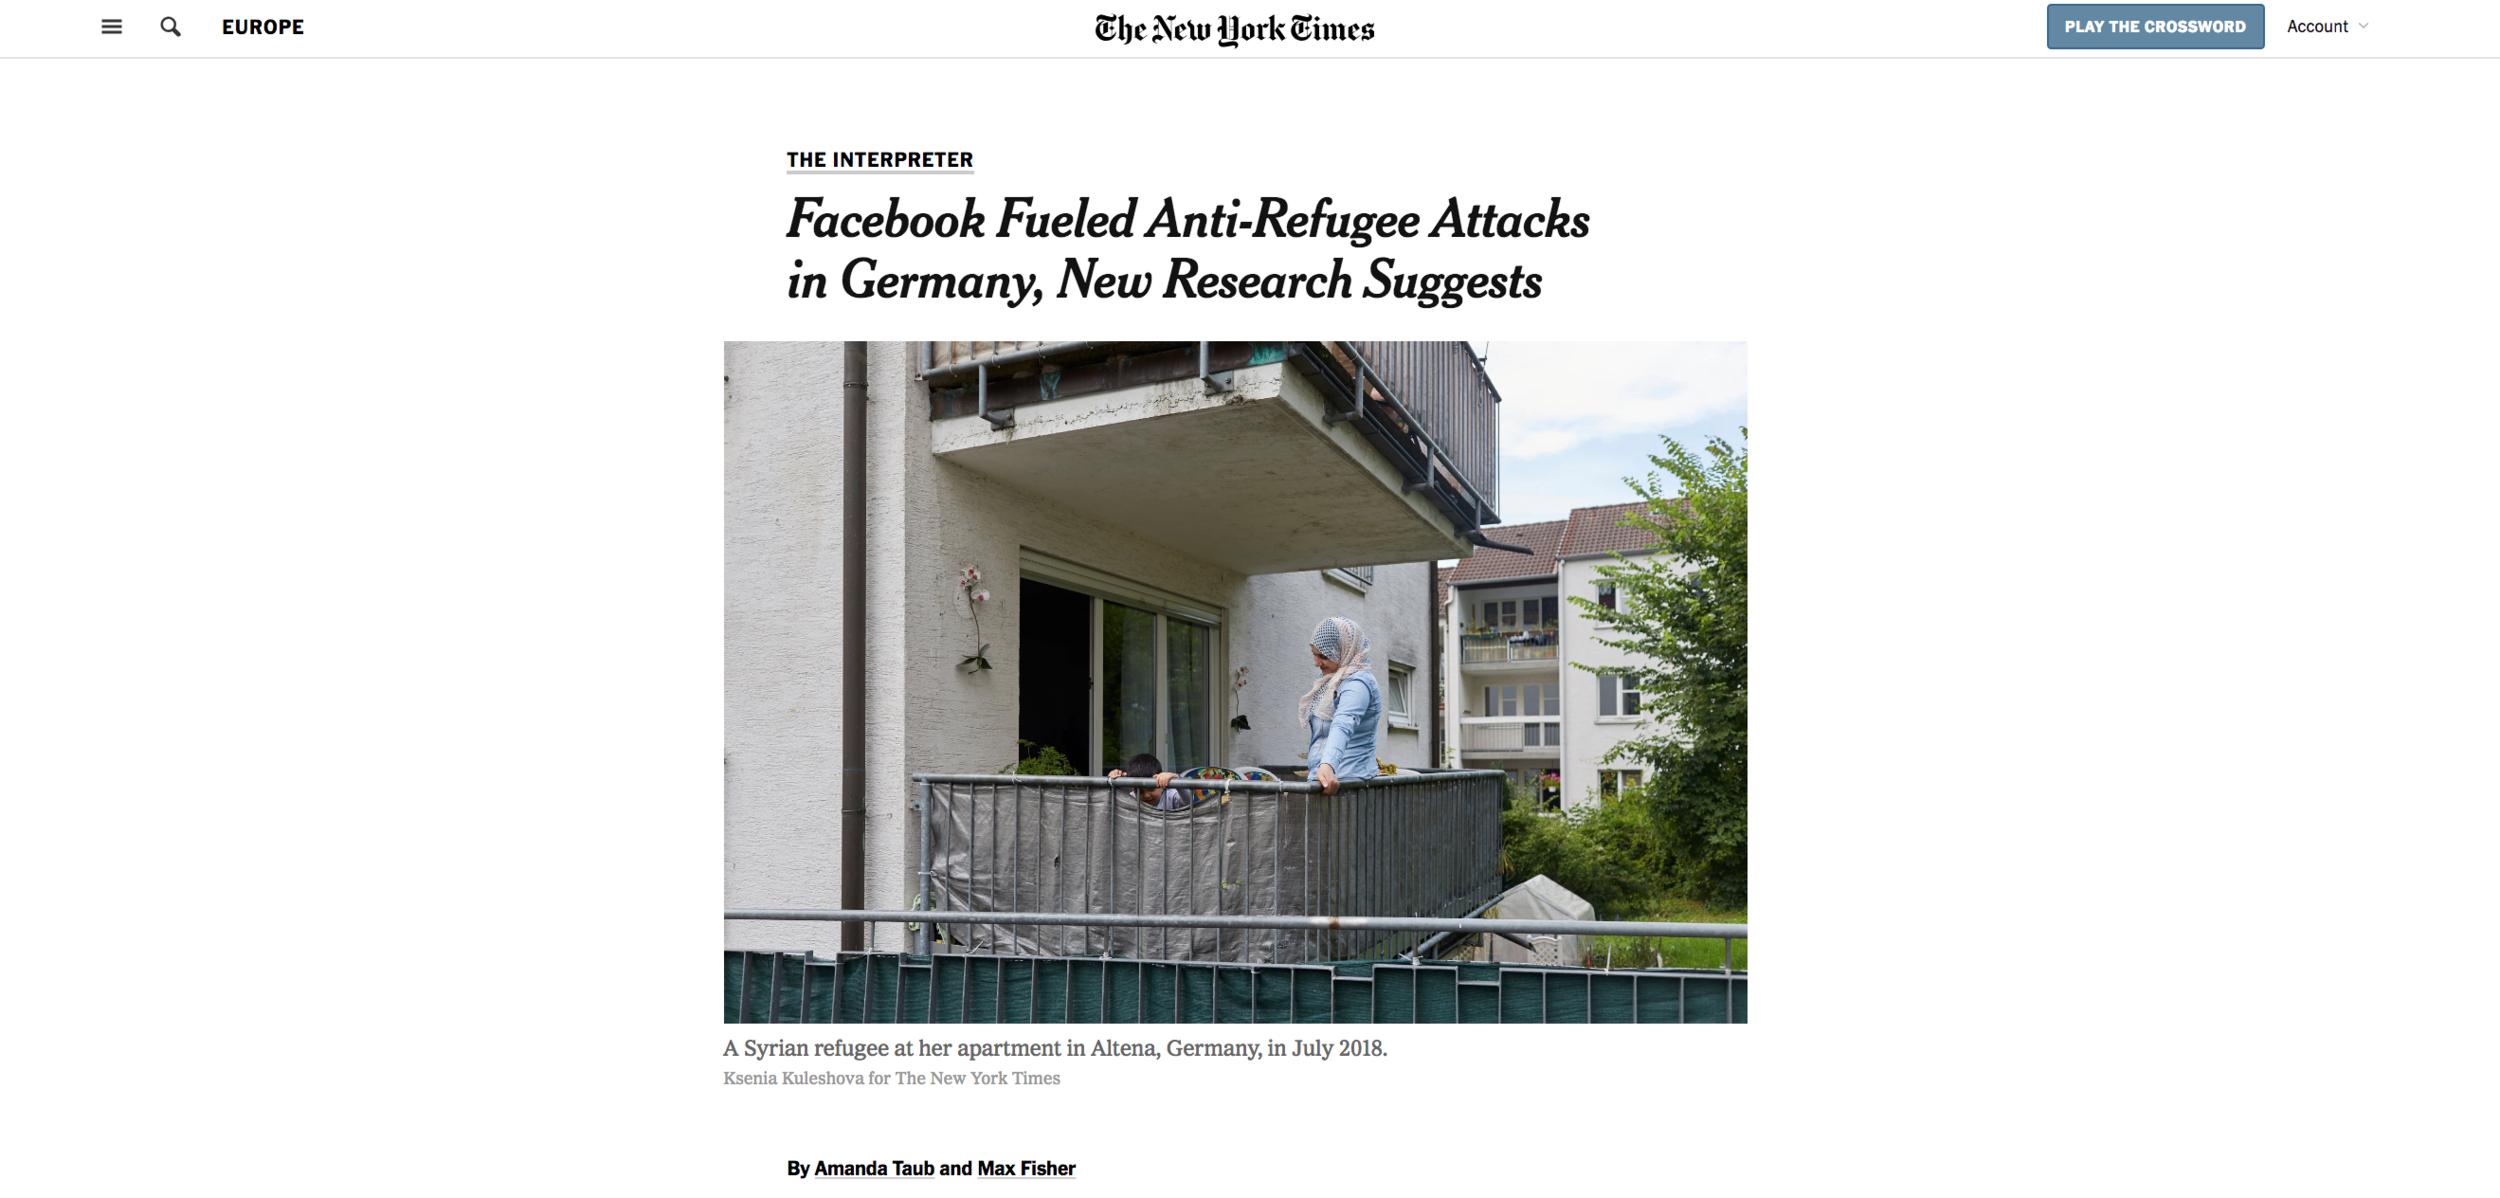  Publication:   The New York Times   Date: 21.08.2018   